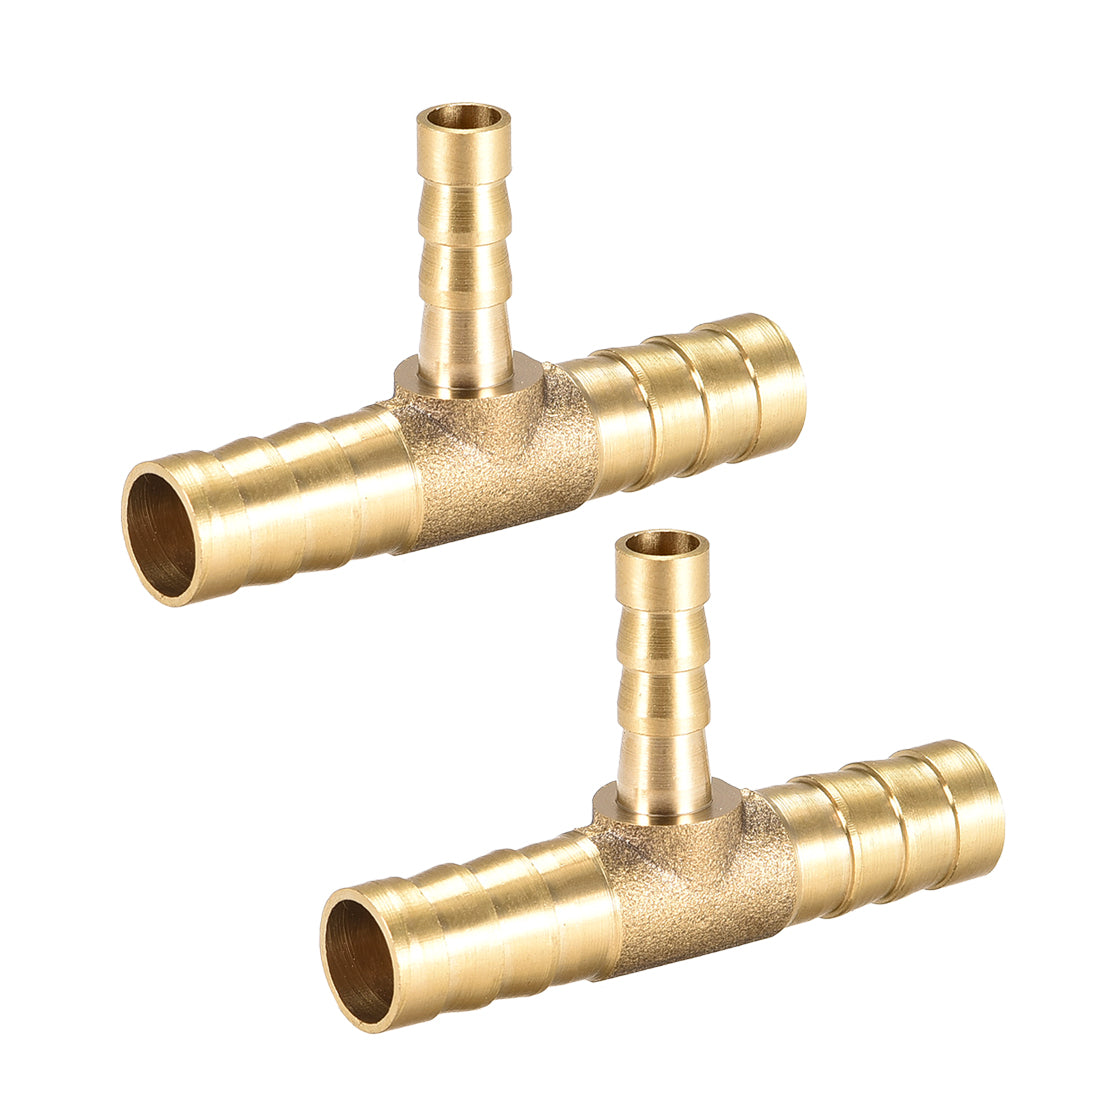 Uxcell Uxcell Tee Brass Barb Fitting Reducer 3 Way, Fit Hose ID 10mm x 6mm x 10mm 2pcs